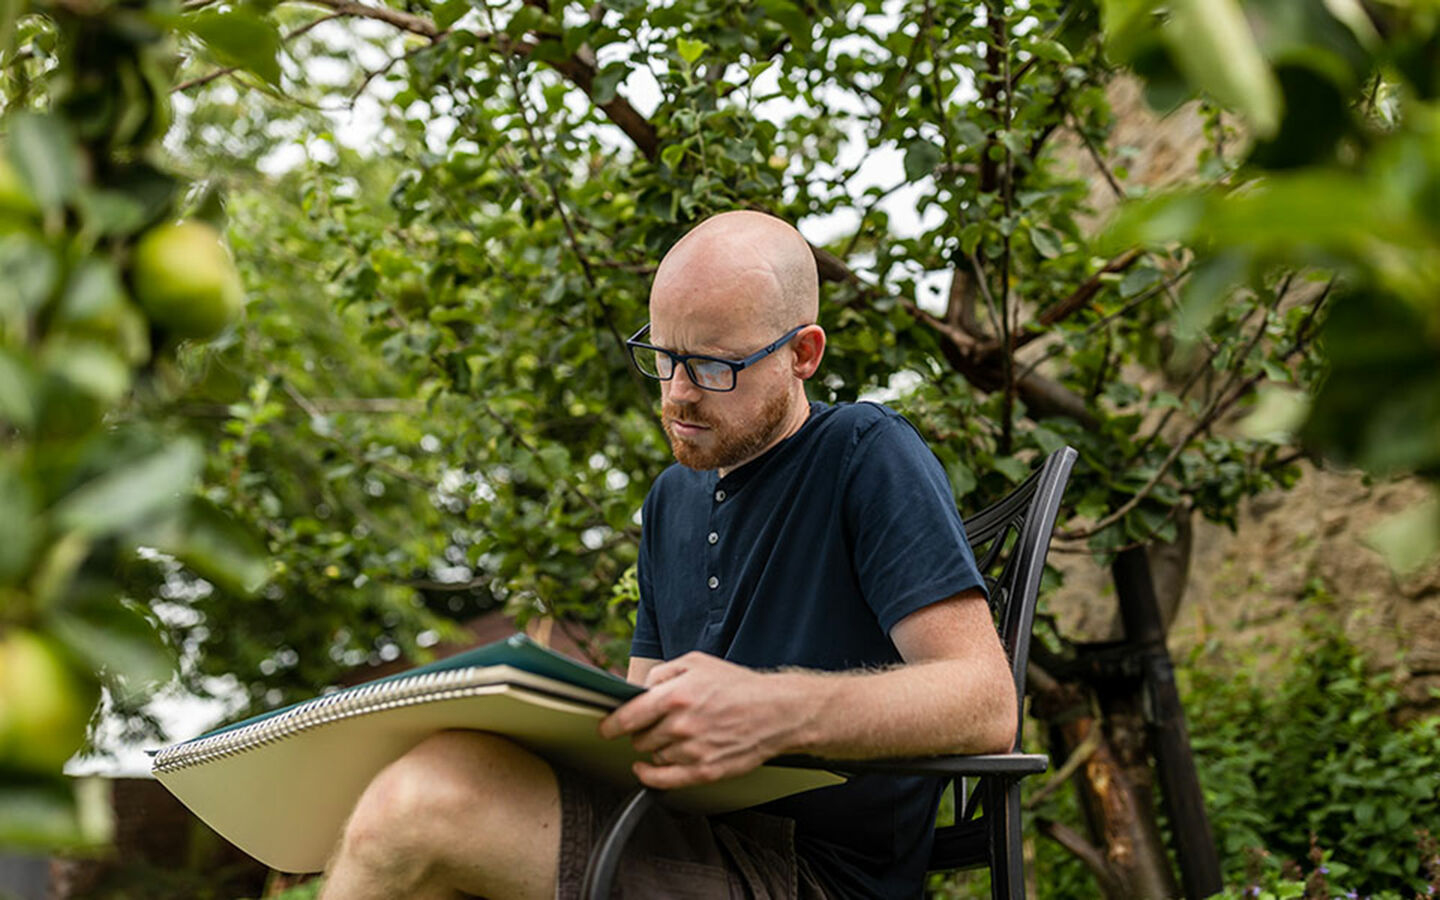 Howard Lee sits on a bench under an apple tree in the garden and draws on a sketchpad